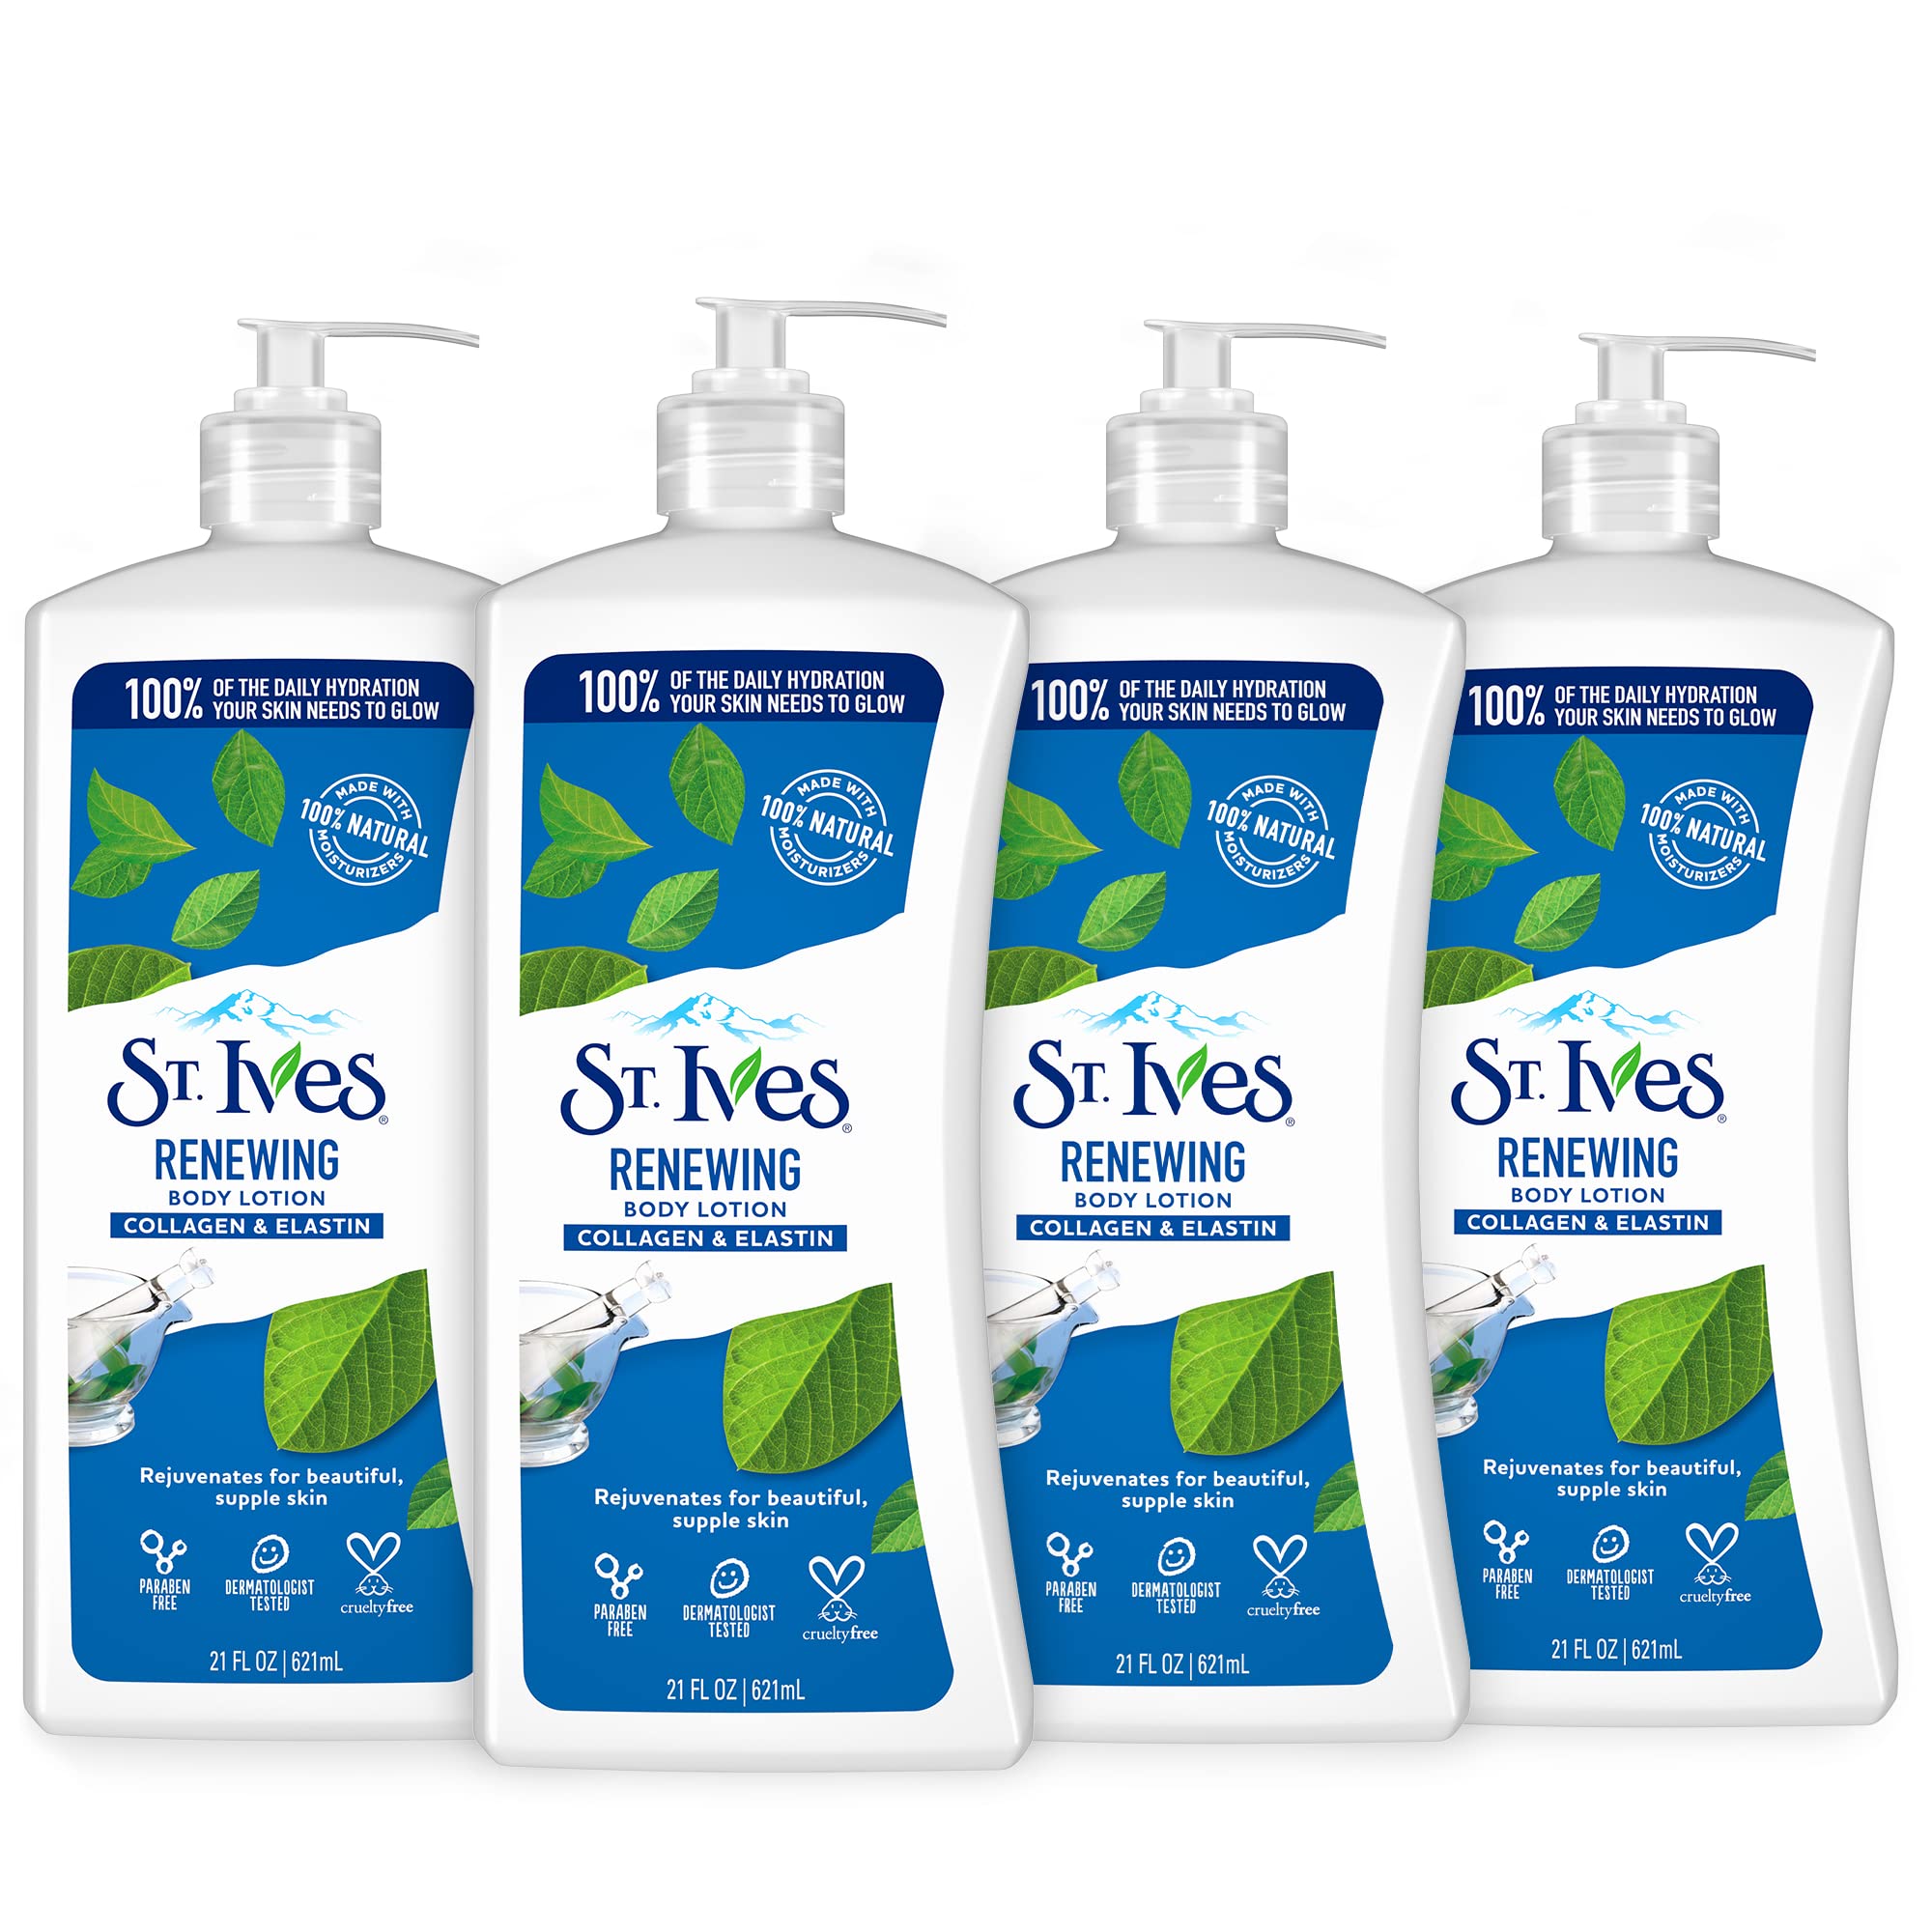 St. Ives Renewing Hand & Body Lotion Moisturizer for Dry Skin Collagen Elastin Made with 100% Natural Moisturizers, 21 oz 4 Pack